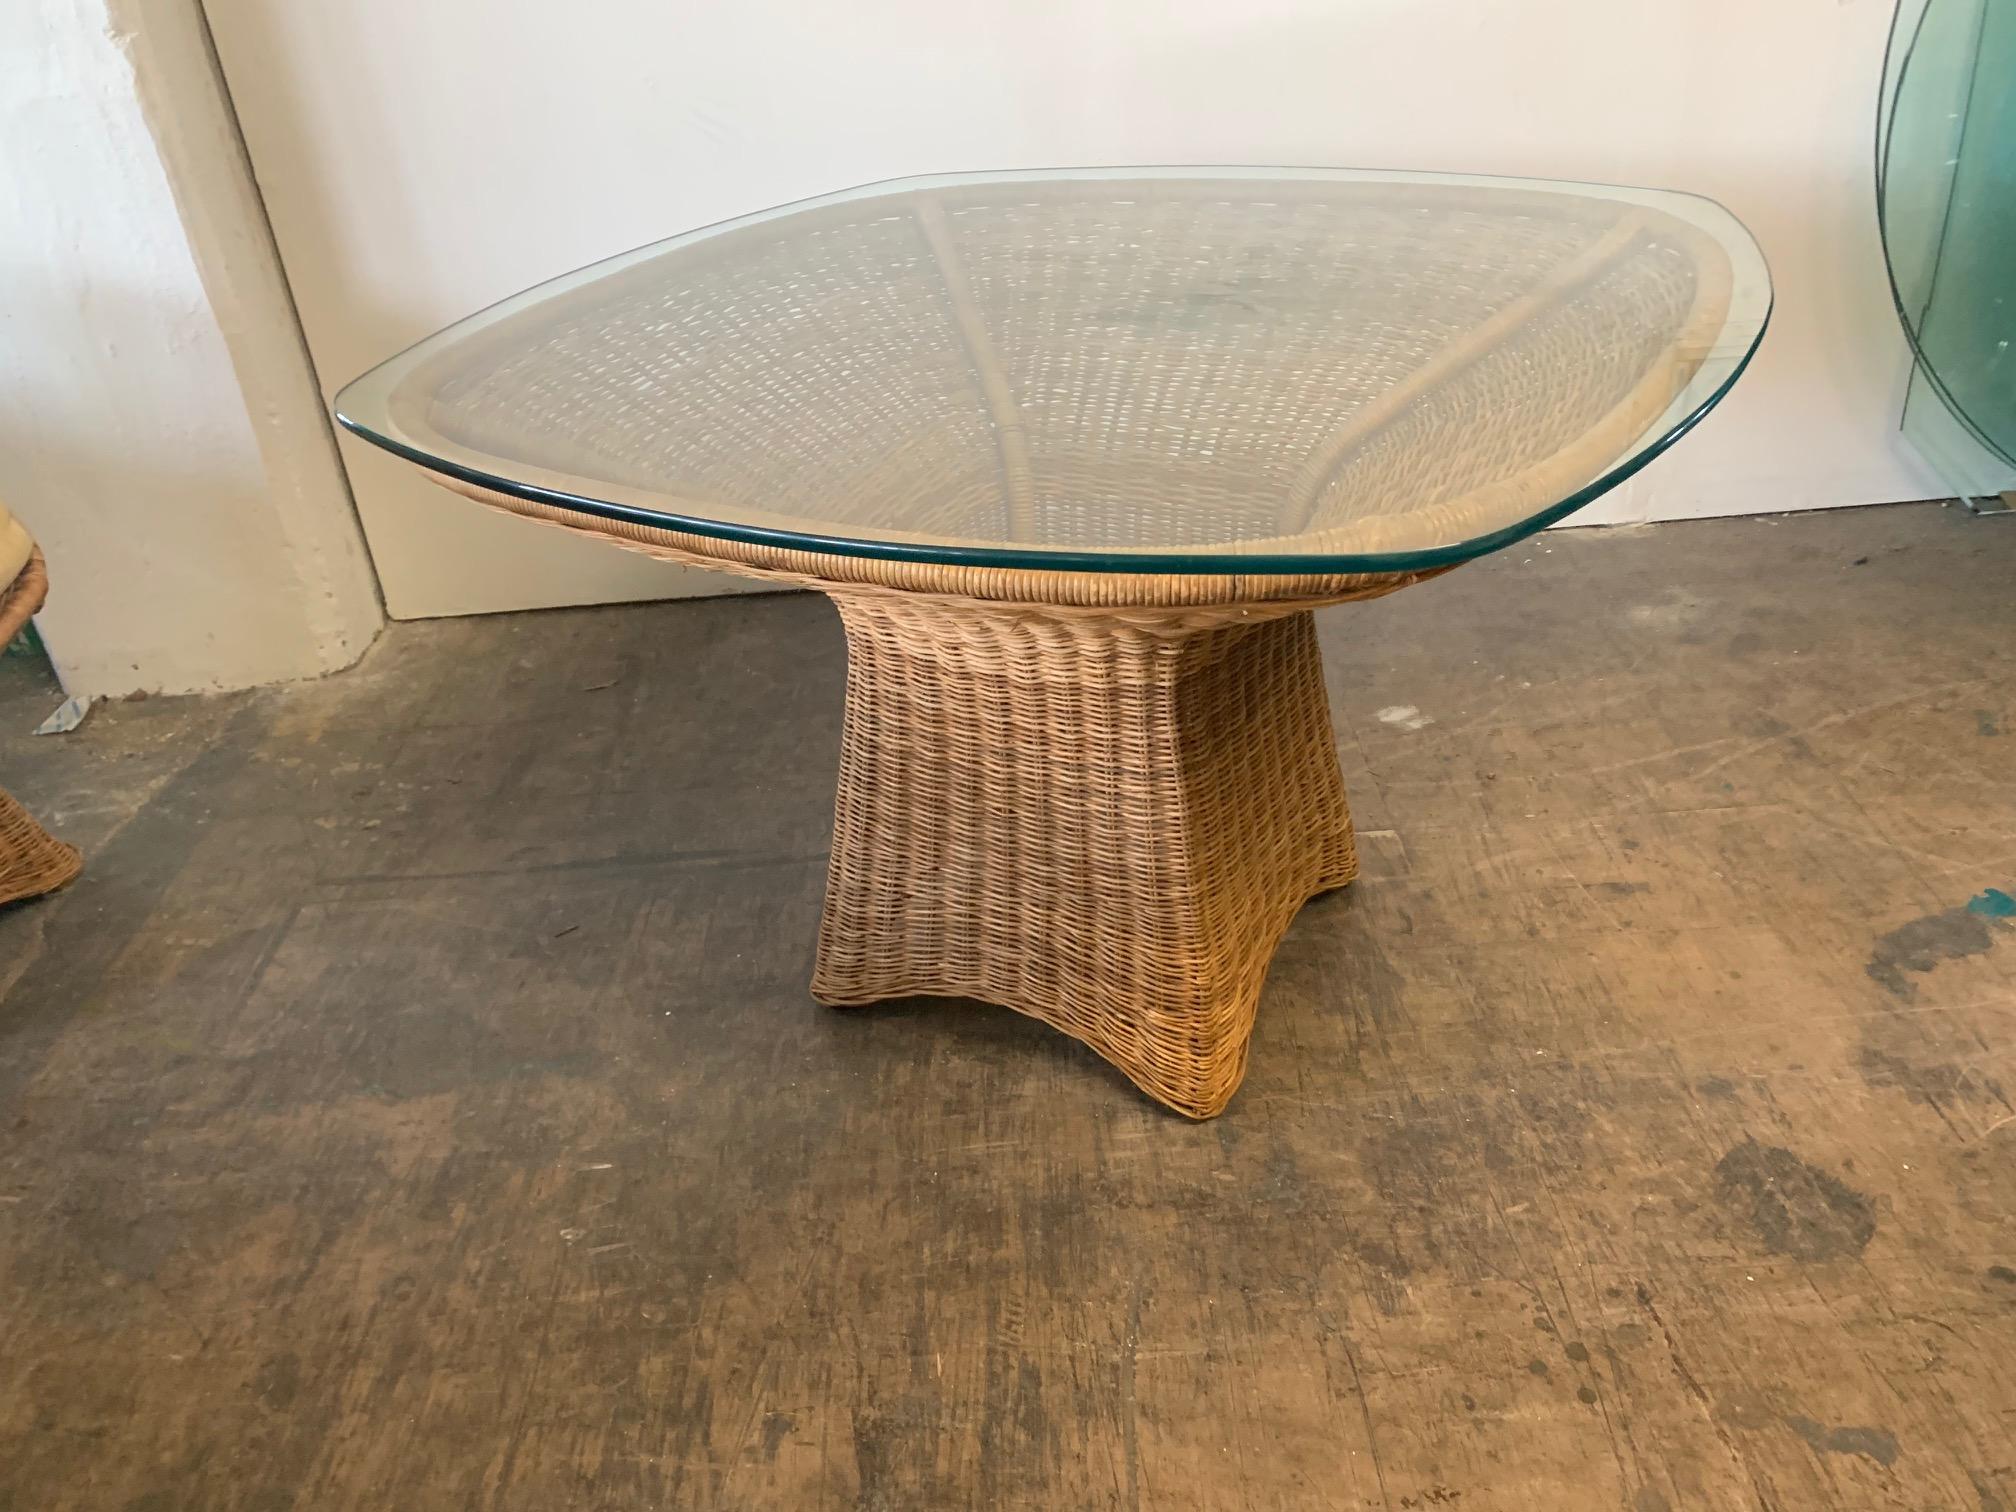 Wicker glass top dining table features unique sculptural form. Very good condition.